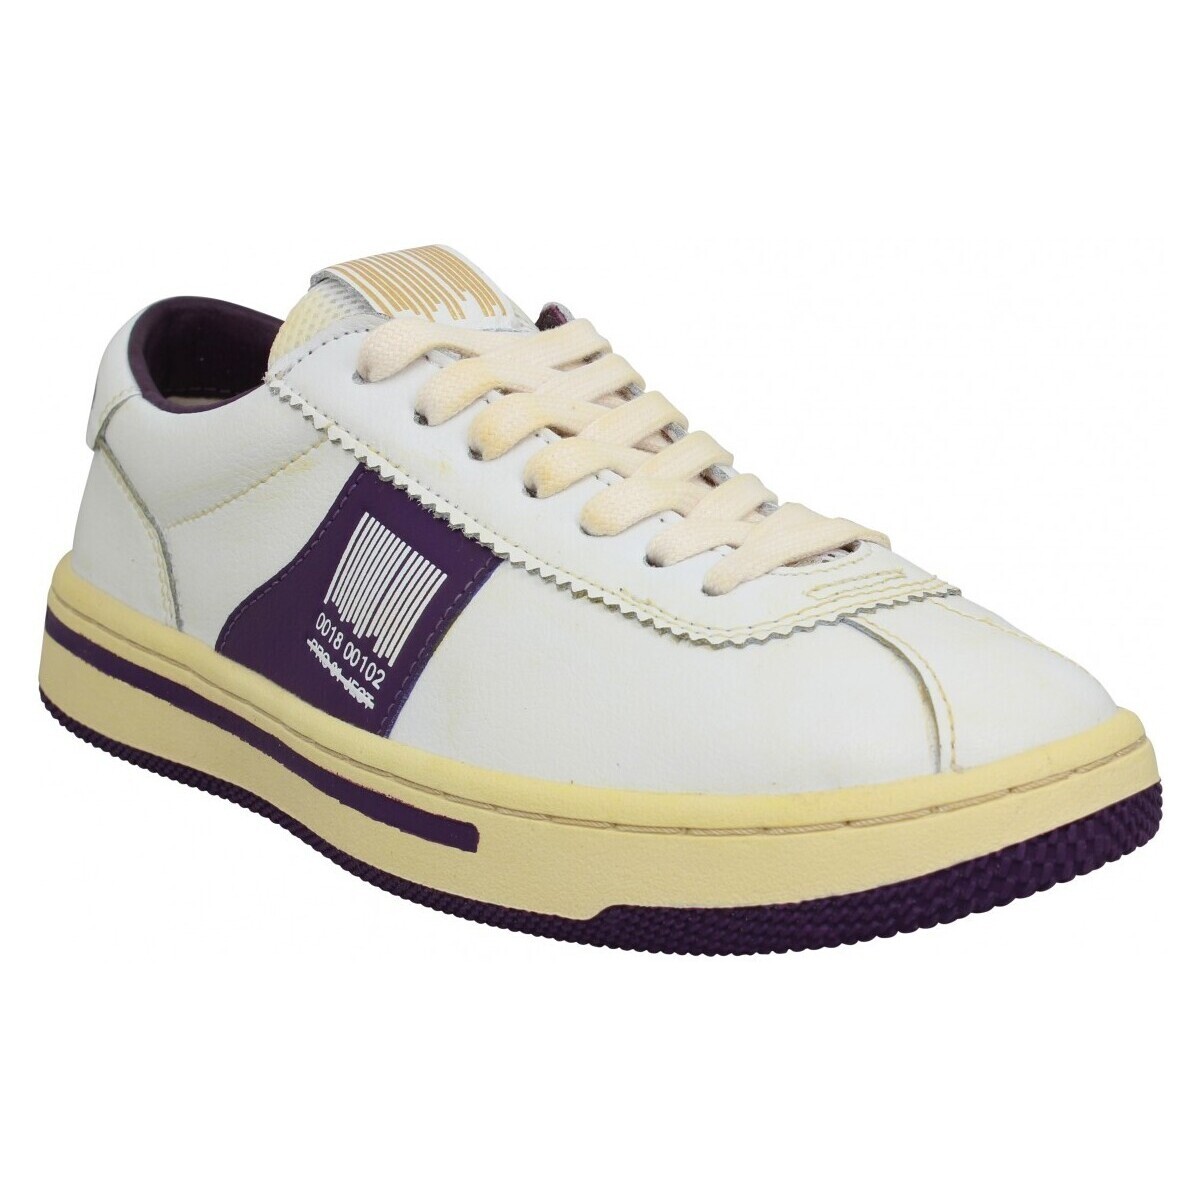 Pro 01 Ject  Sneakers Pro 01 Ject P5lw Cuir Femme Blanc Violet